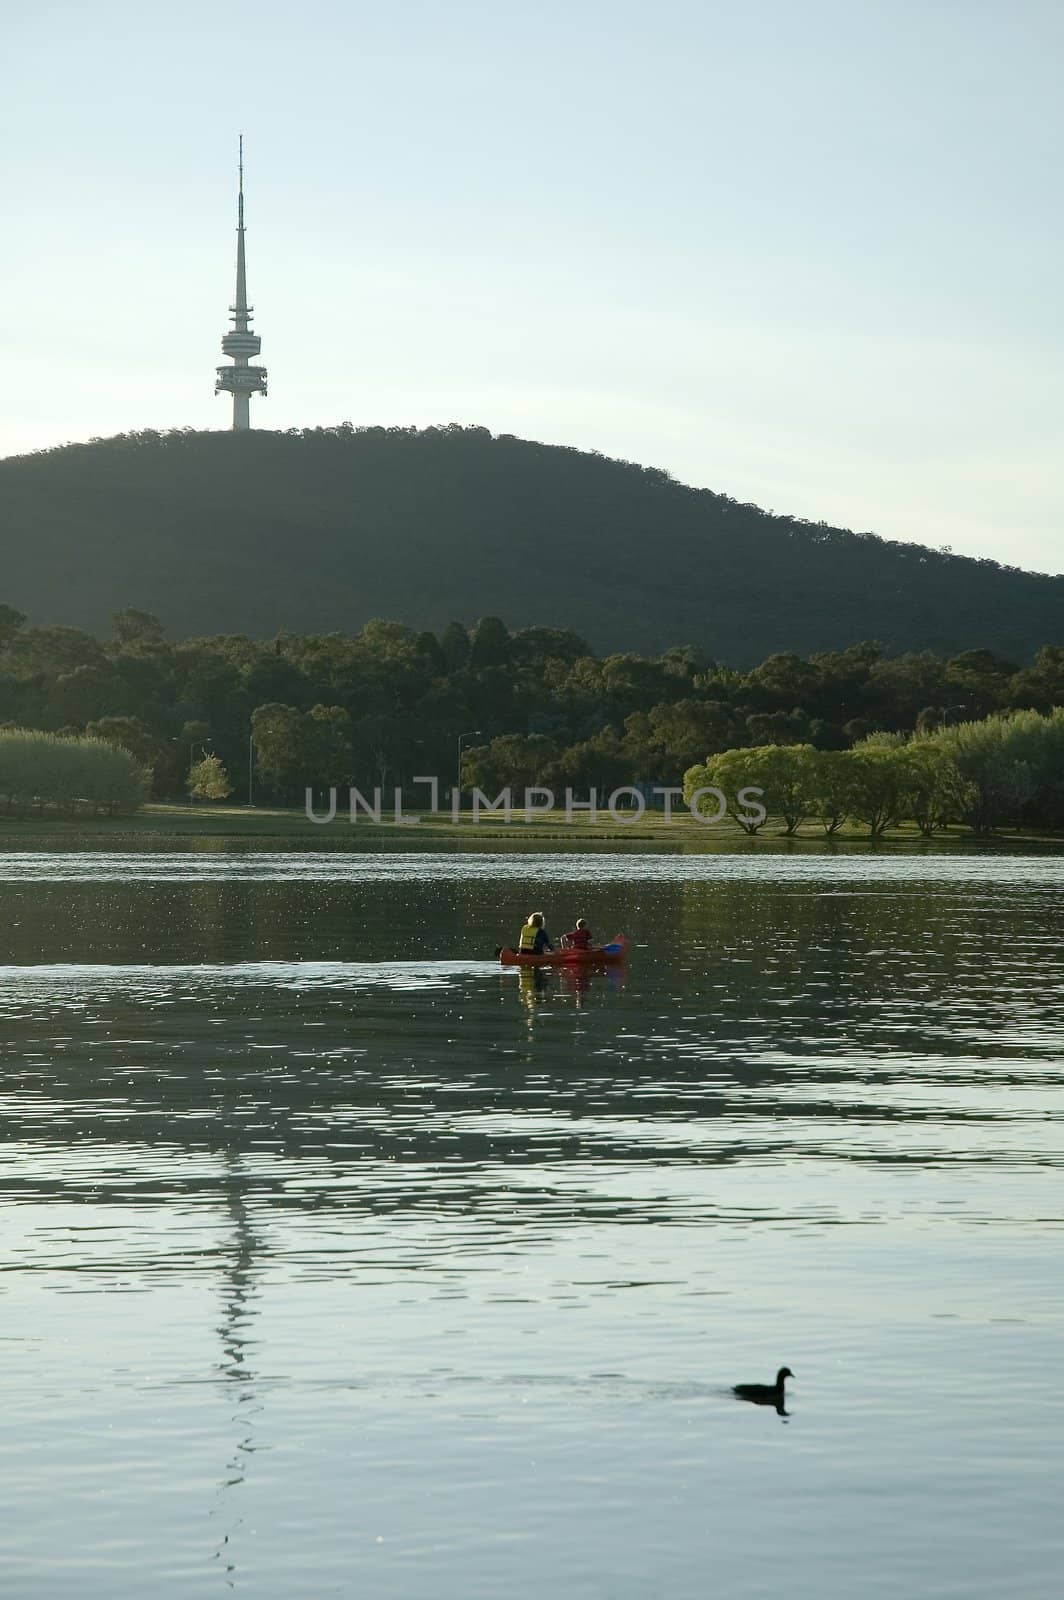 kayak with a woman and a boy, famous Telstra tower in background; duck in foreground; Canberra - Australia